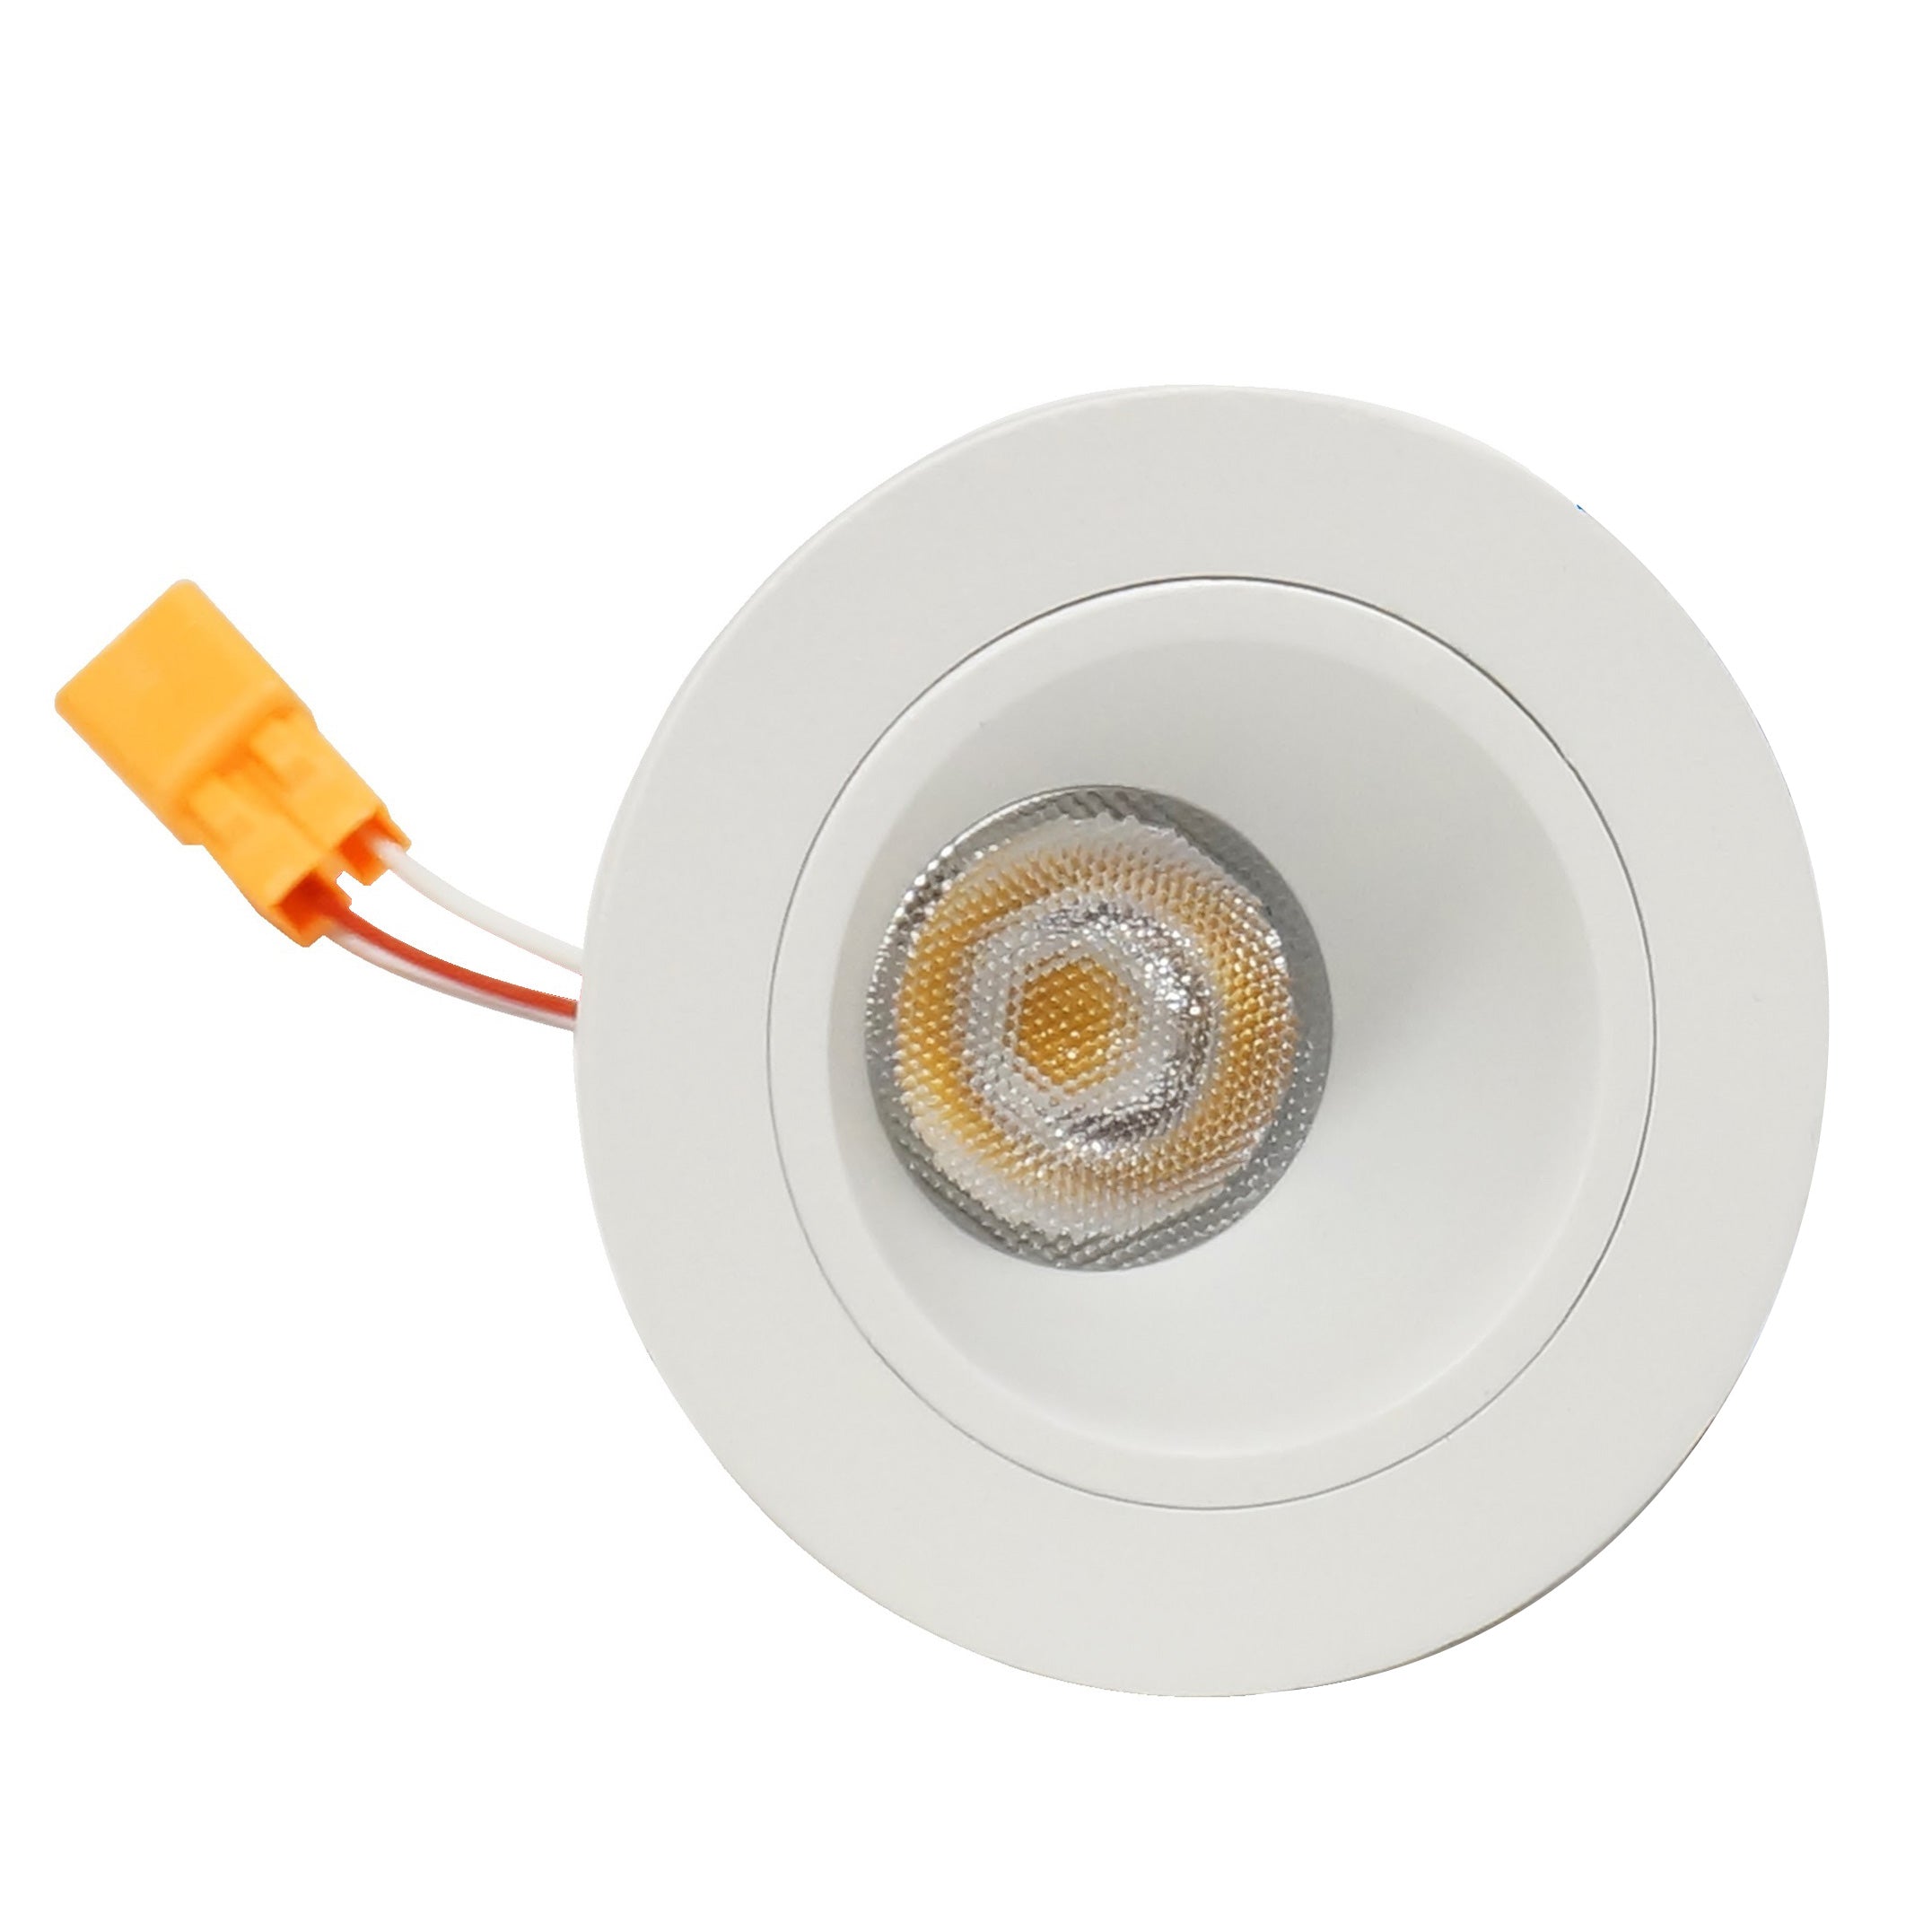 NICOR 2 in. LED Downlight 3000k Soft White 678Lm with White Trim